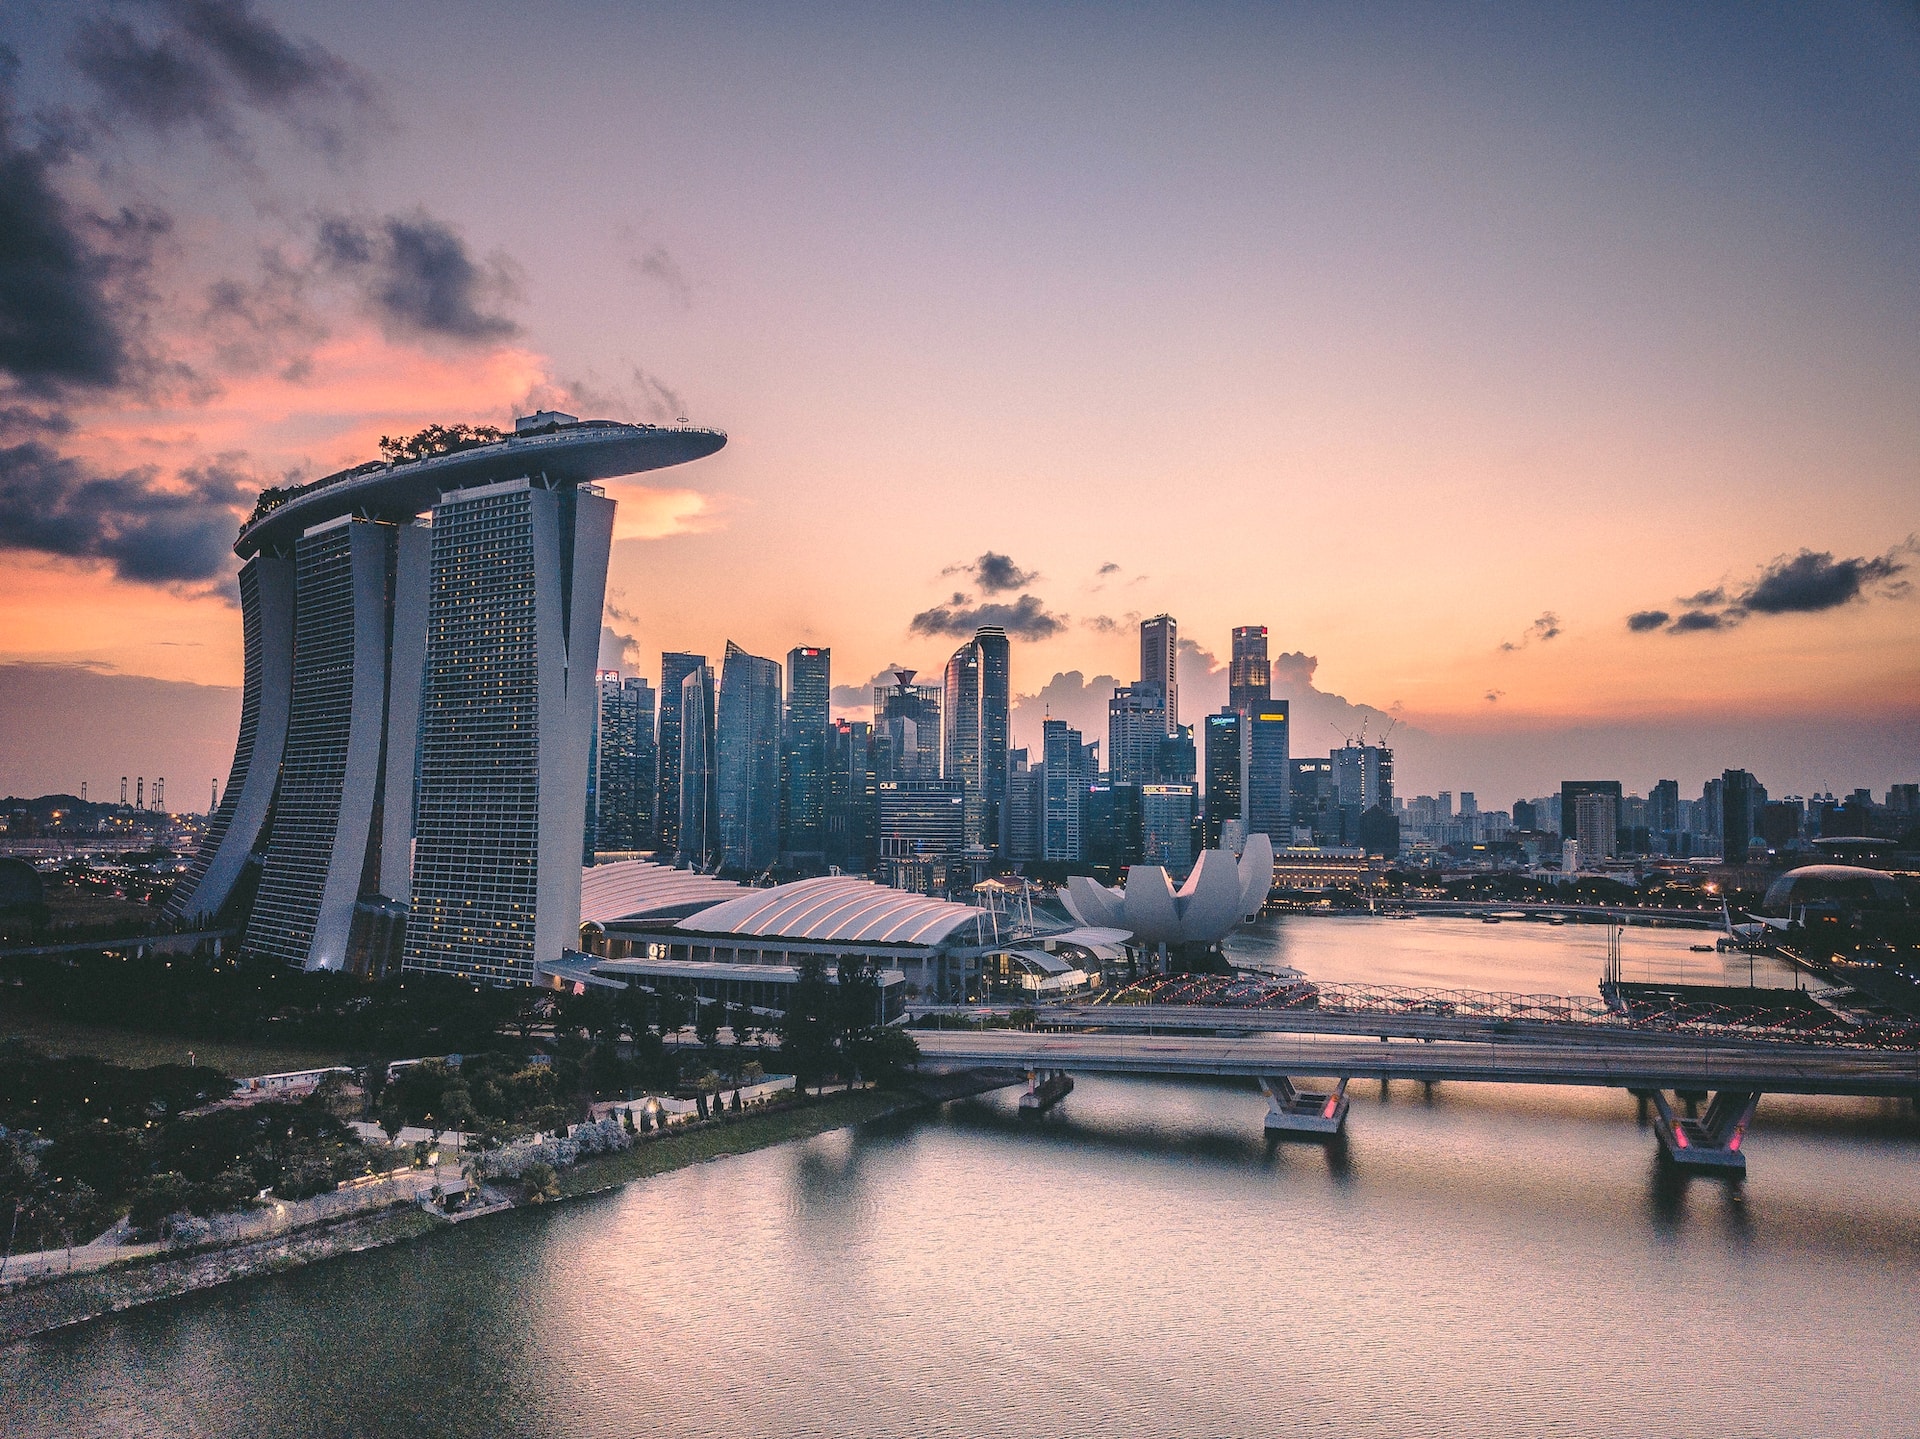 Sunset horizon shot of Singapore city, featuring Marina Bay Sands Hotel and rooftop pool. 